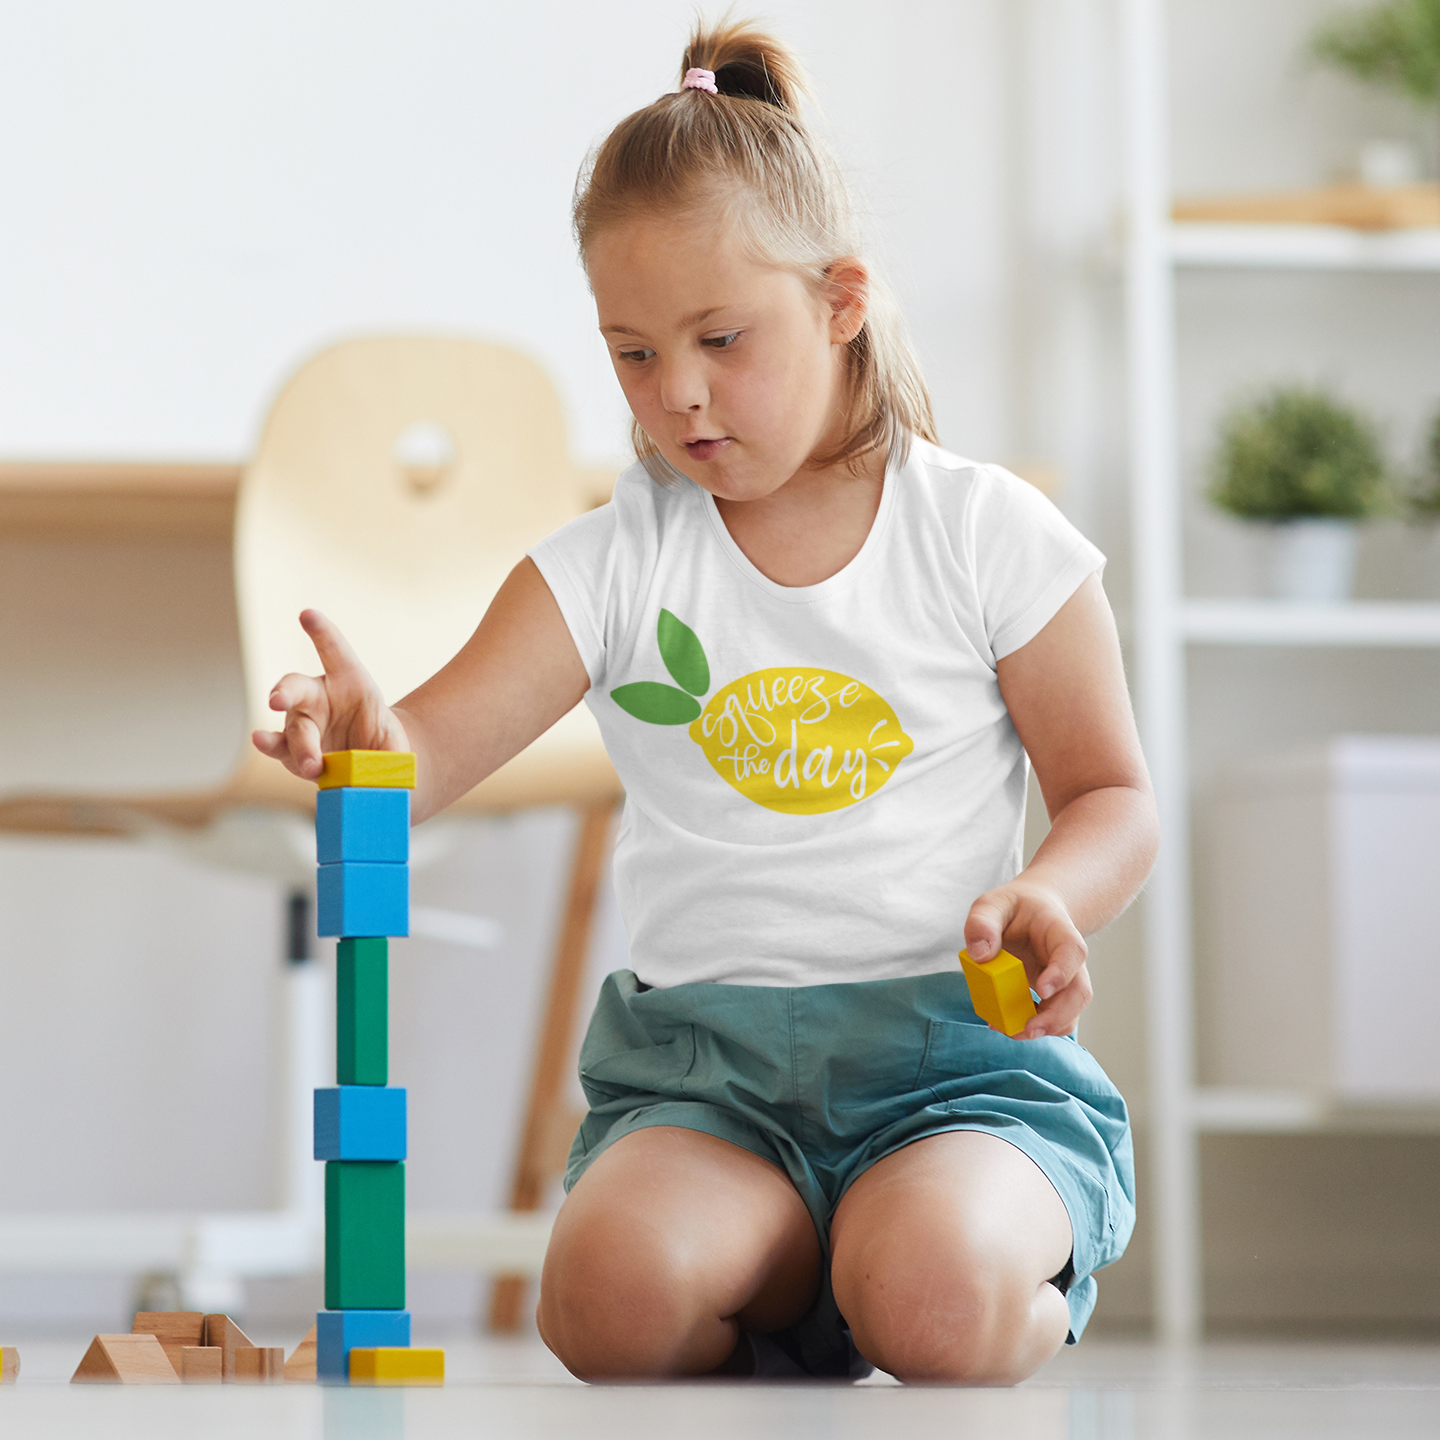 'Squeeze the day' kids shortsleeve shirt